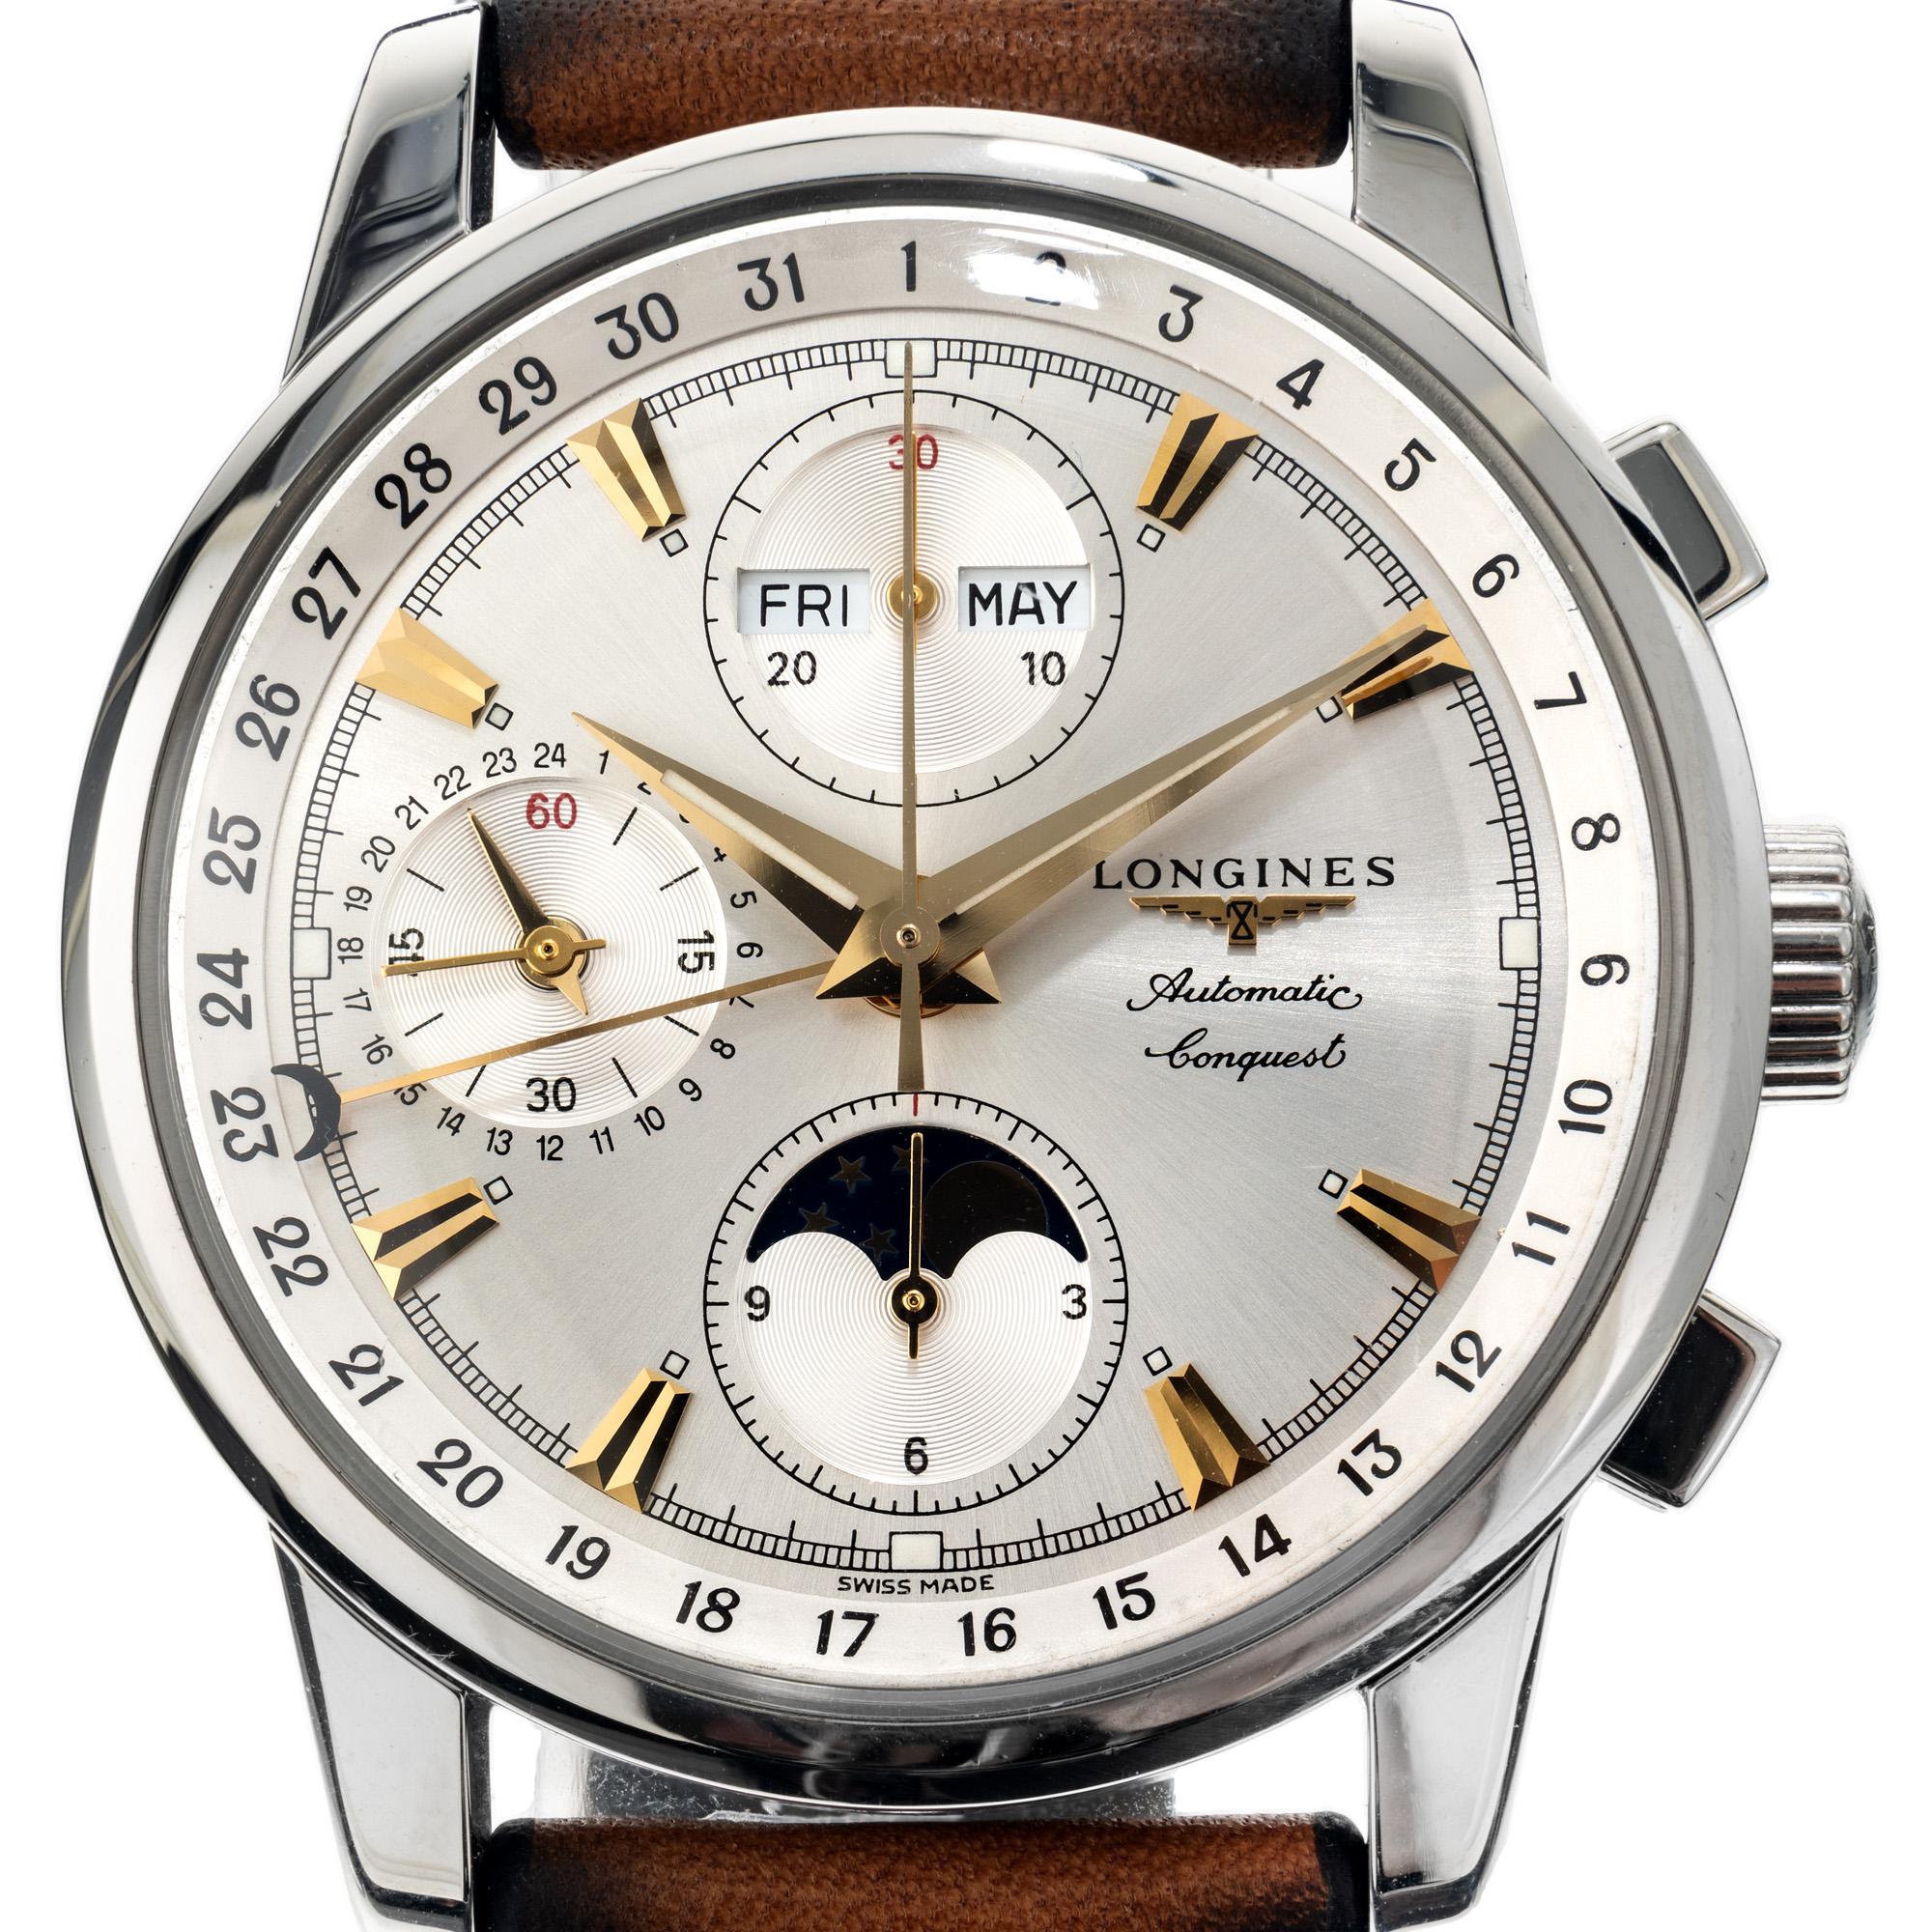 Men's heritage collection Longines automatic chronograph day date month complicated steel watch. Which also includes a Moonphase feature. The dial is silver tone with gold tone markers. The band is new and not original to the watch. 

Length: